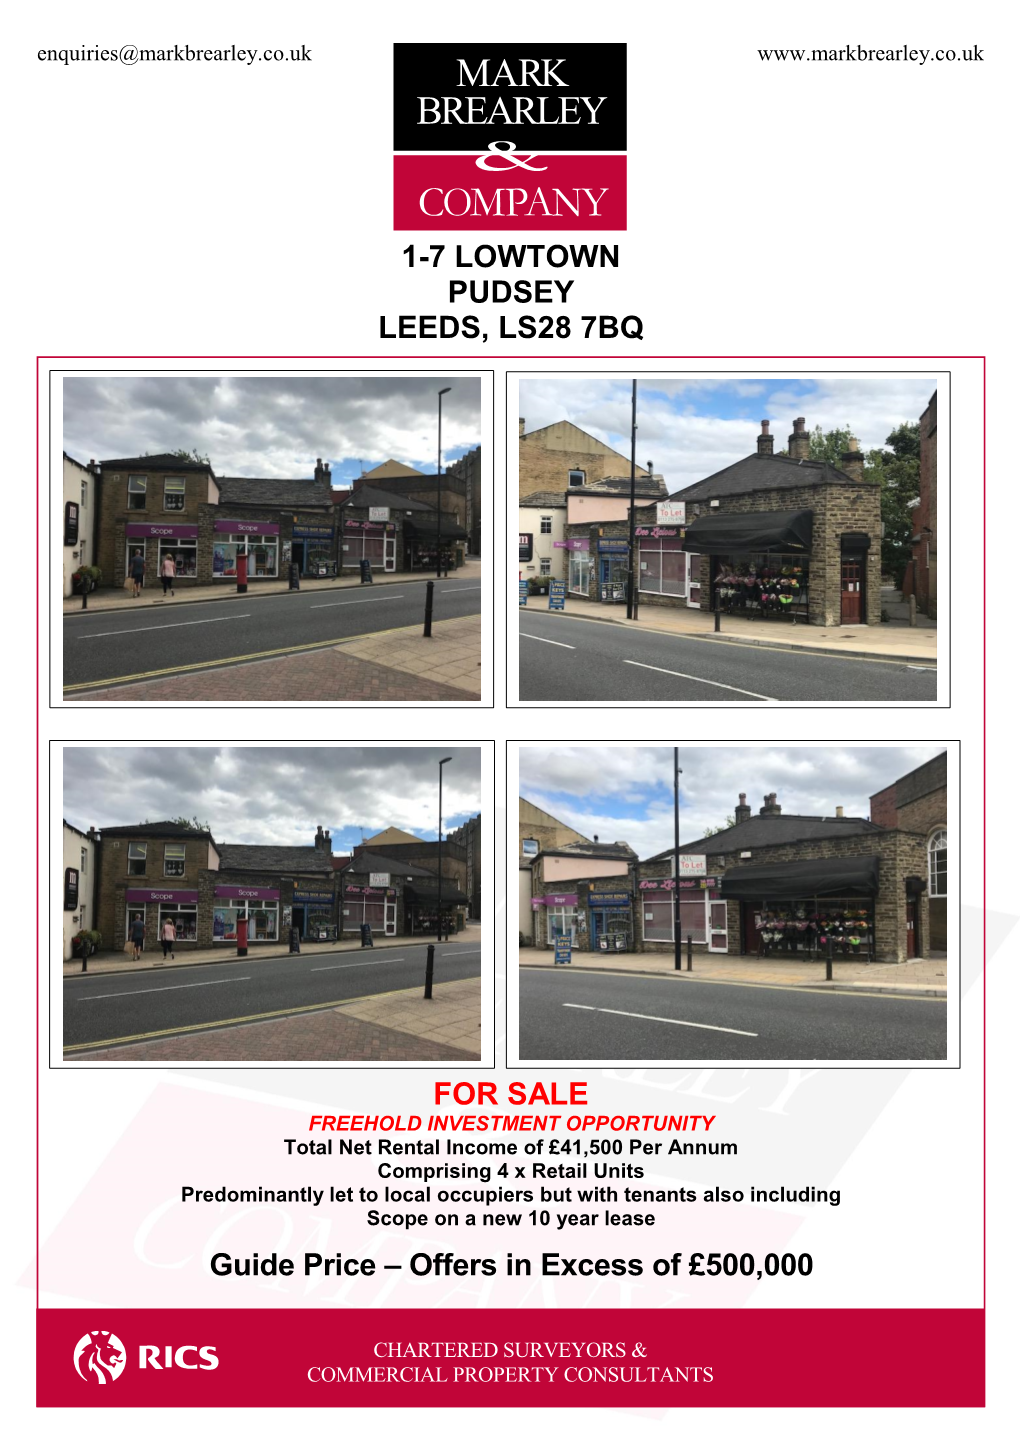 1-7 LOWTOWN PUDSEY LEEDS, LS28 7BQ for SALE Guide Price